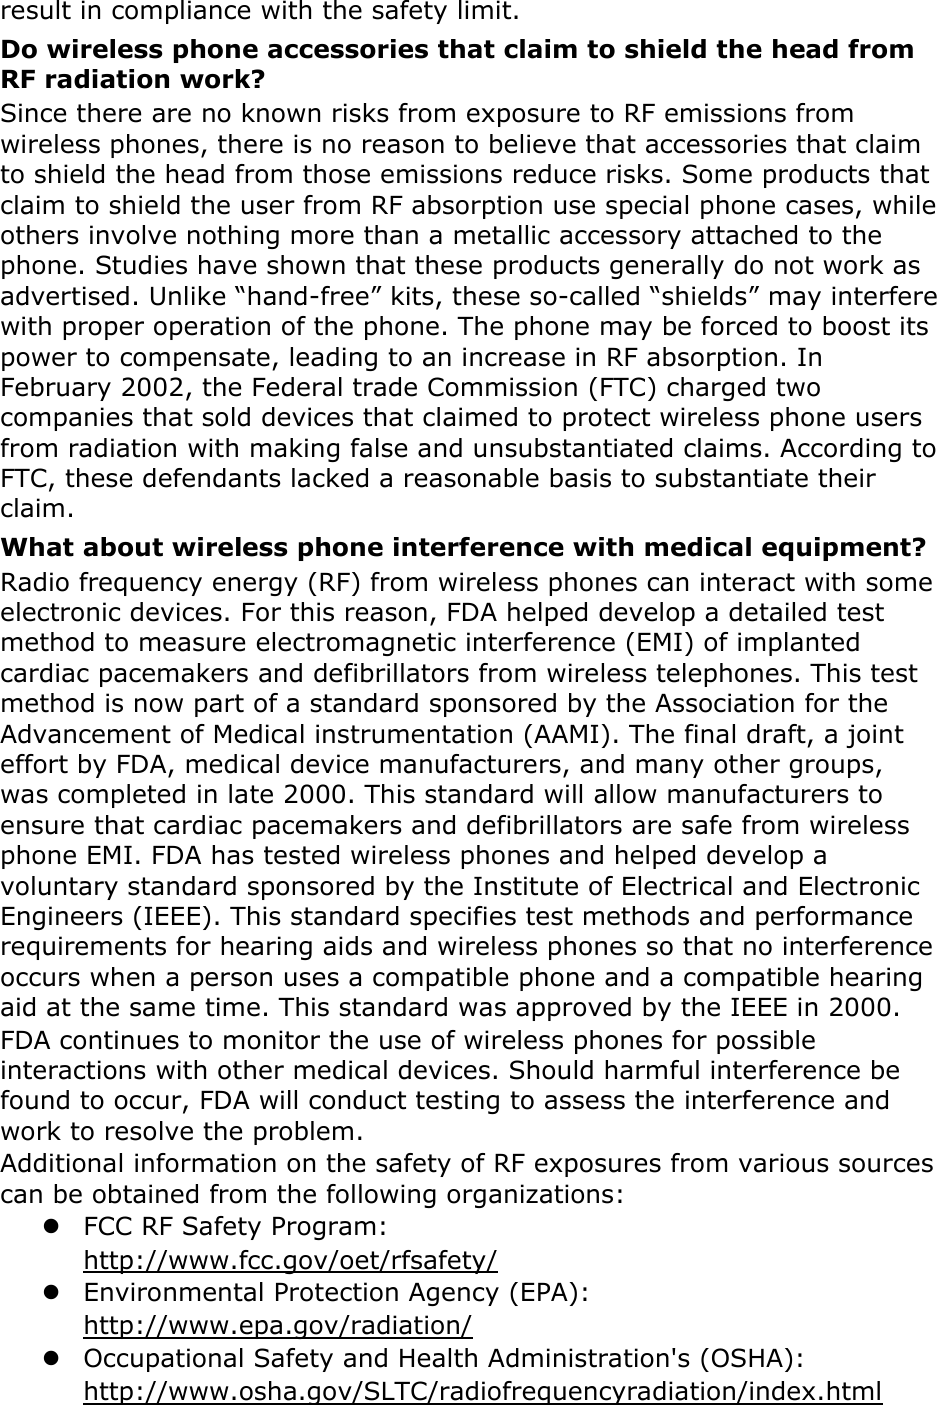 result in compliance with the safety limit. Do wireless phone accessories that claim to shield the head from RF radiation work? Since there are no known risks from exposure to RF emissions from wireless phones, there is no reason to believe that accessories that claim to shield the head from those emissions reduce risks. Some products that claim to shield the user from RF absorption use special phone cases, while others involve nothing more than a metallic accessory attached to the phone. Studies have shown that these products generally do not work as advertised. Unlike “hand-free” kits, these so-called “shields” may interfere with proper operation of the phone. The phone may be forced to boost its power to compensate, leading to an increase in RF absorption. In February 2002, the Federal trade Commission (FTC) charged two companies that sold devices that claimed to protect wireless phone users from radiation with making false and unsubstantiated claims. According to FTC, these defendants lacked a reasonable basis to substantiate their claim. What about wireless phone interference with medical equipment? Radio frequency energy (RF) from wireless phones can interact with some electronic devices. For this reason, FDA helped develop a detailed test method to measure electromagnetic interference (EMI) of implanted cardiac pacemakers and defibrillators from wireless telephones. This test method is now part of a standard sponsored by the Association for the Advancement of Medical instrumentation (AAMI). The final draft, a joint effort by FDA, medical device manufacturers, and many other groups, was completed in late 2000. This standard will allow manufacturers to ensure that cardiac pacemakers and defibrillators are safe from wireless phone EMI. FDA has tested wireless phones and helped develop a voluntary standard sponsored by the Institute of Electrical and Electronic Engineers (IEEE). This standard specifies test methods and performance requirements for hearing aids and wireless phones so that no interference occurs when a person uses a compatible phone and a compatible hearing aid at the same time. This standard was approved by the IEEE in 2000. FDA continues to monitor the use of wireless phones for possible interactions with other medical devices. Should harmful interference be found to occur, FDA will conduct testing to assess the interference and work to resolve the problem. Additional information on the safety of RF exposures from various sources can be obtained from the following organizations:  FCC RF Safety Program:   http://www.fcc.gov/oet/rfsafety/  Environmental Protection Agency (EPA):   http://www.epa.gov/radiation/  Occupational Safety and Health Administration&apos;s (OSHA):         http://www.osha.gov/SLTC/radiofrequencyradiation/index.html 